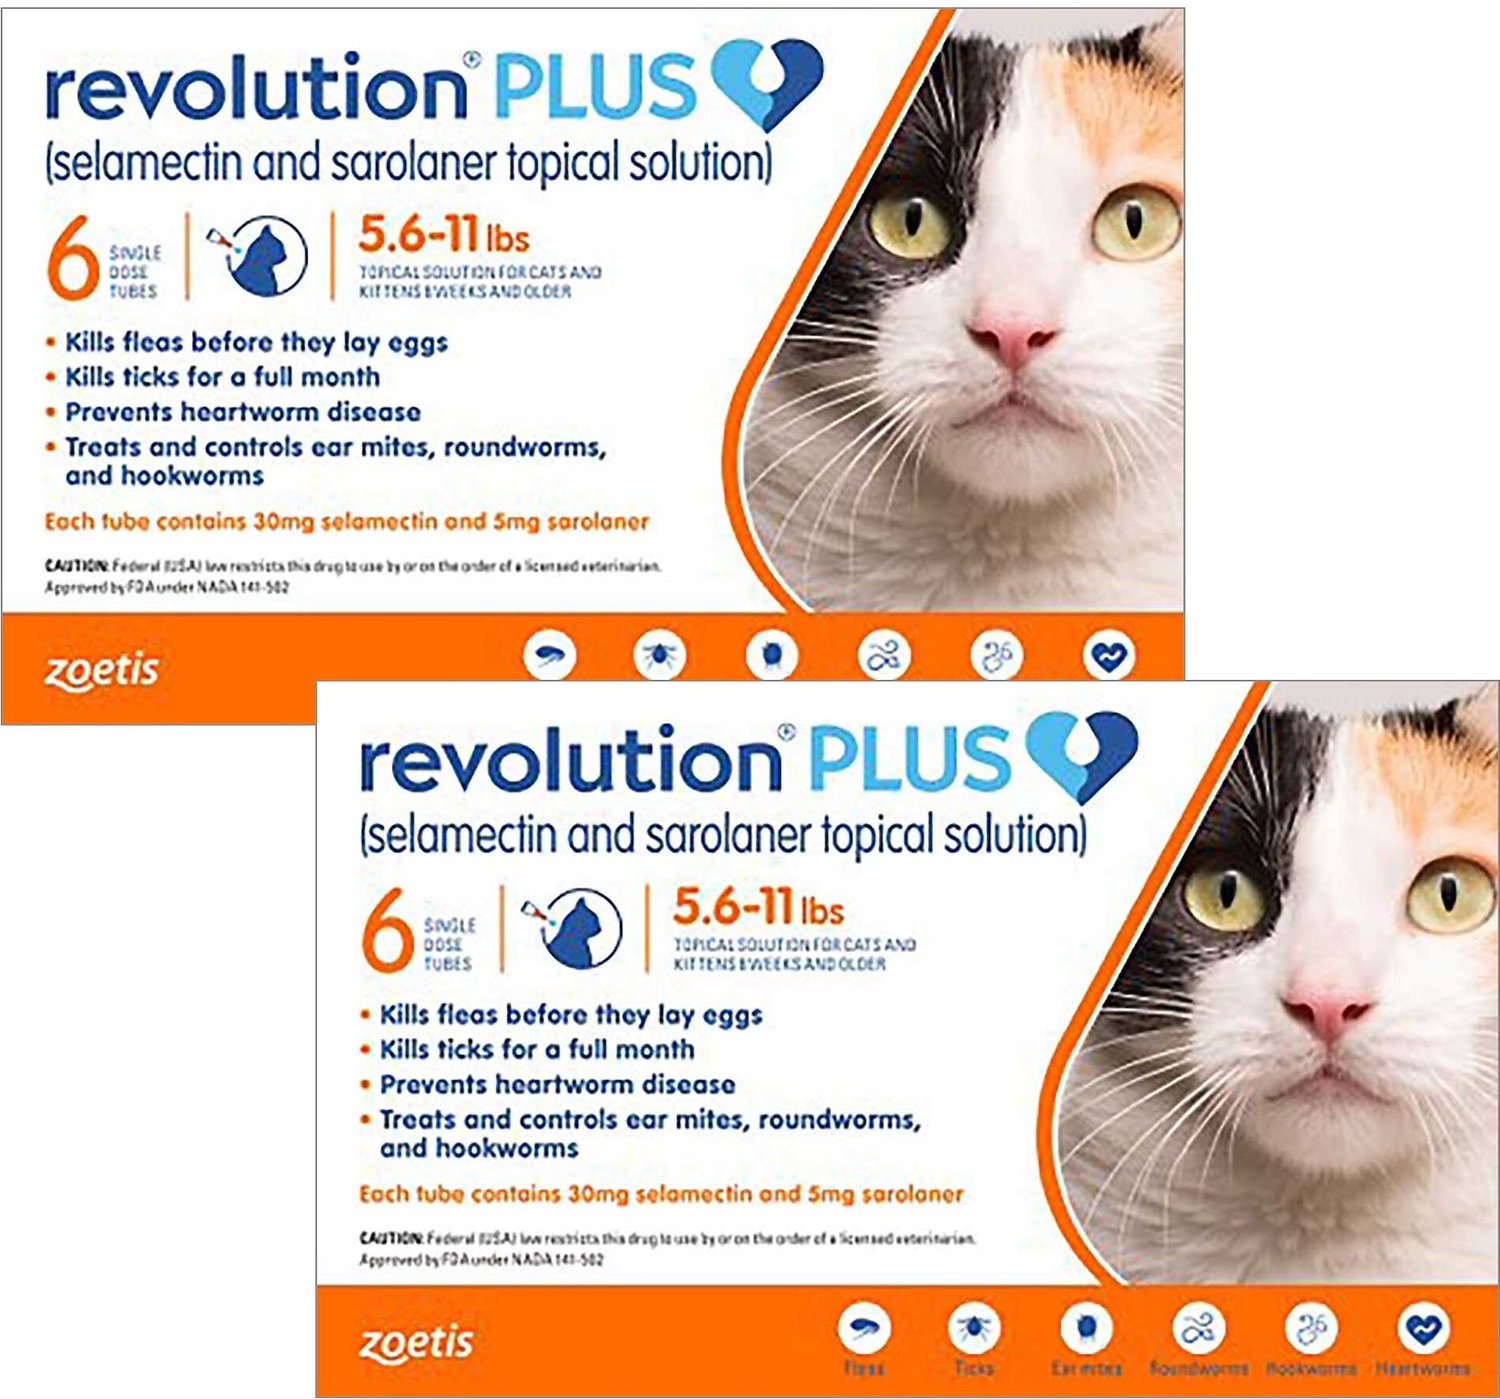 REVOLUTION Plus Topical Solution for Cats, 5.611 lbs, (Orange Box), 12